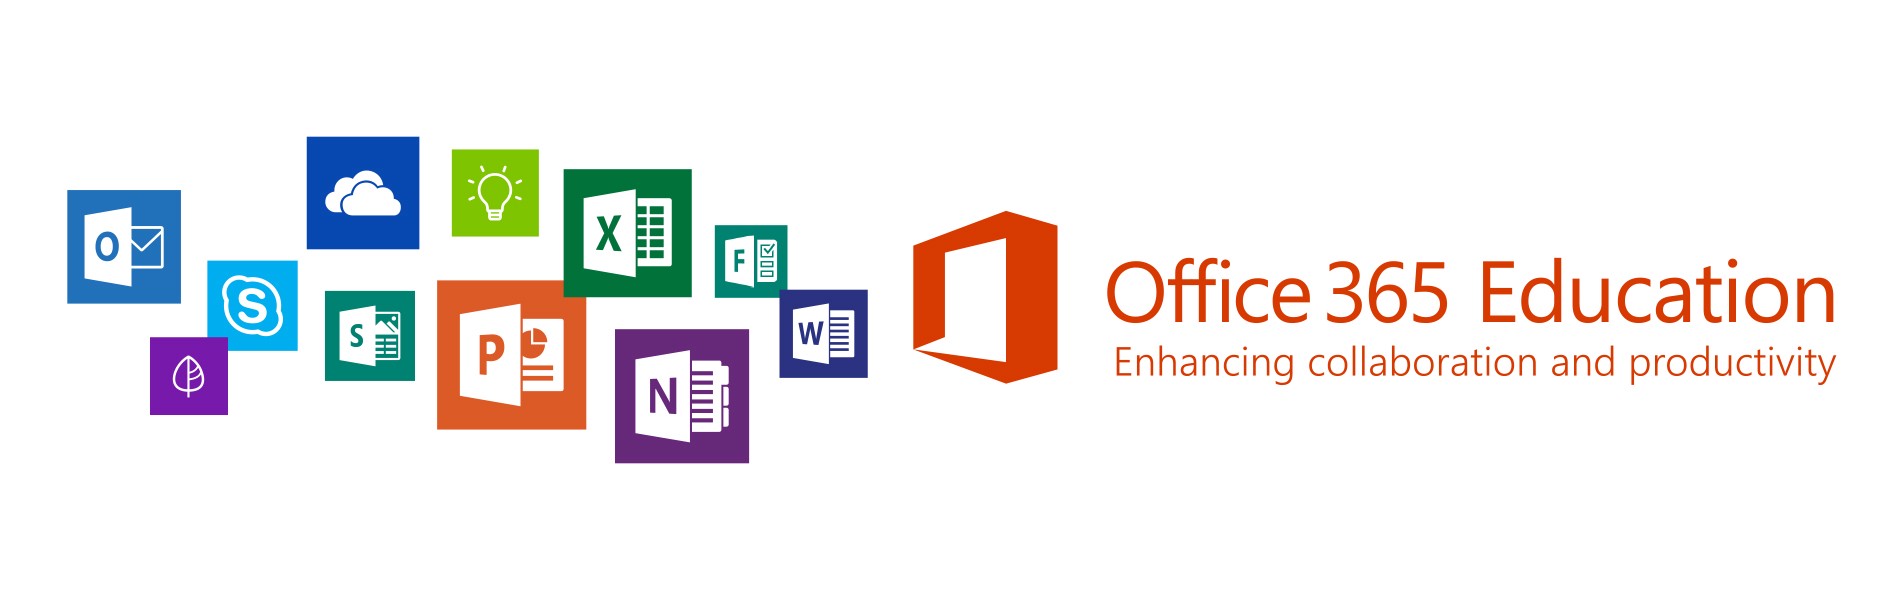 office365 fre for students.jpeg